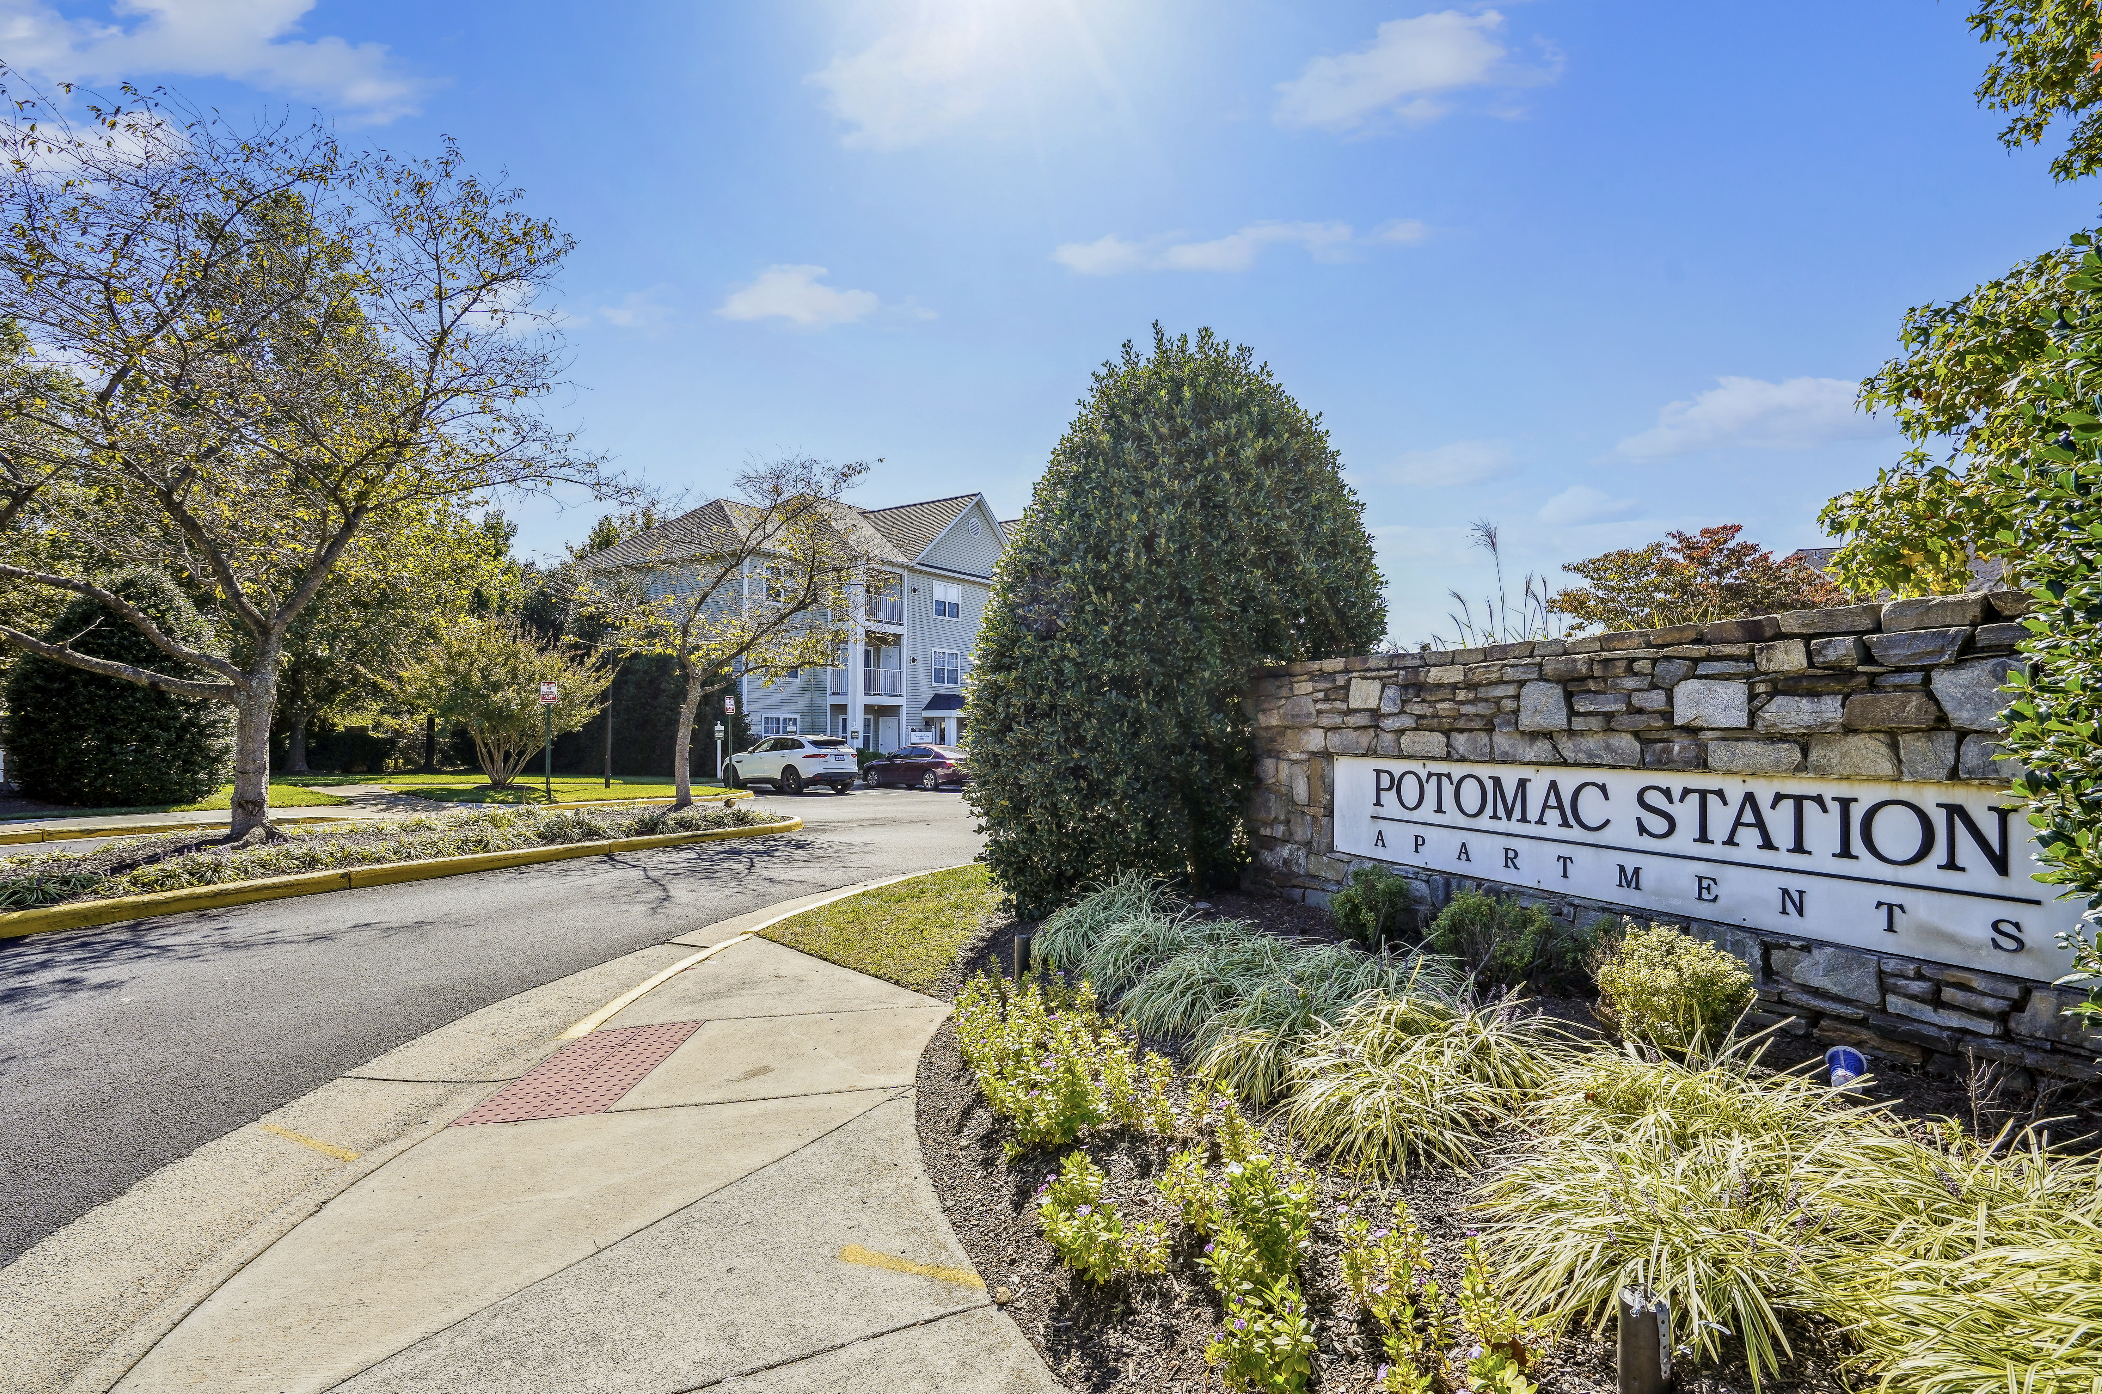  Live at Potomac Station Apartments and experience a welcoming community. 